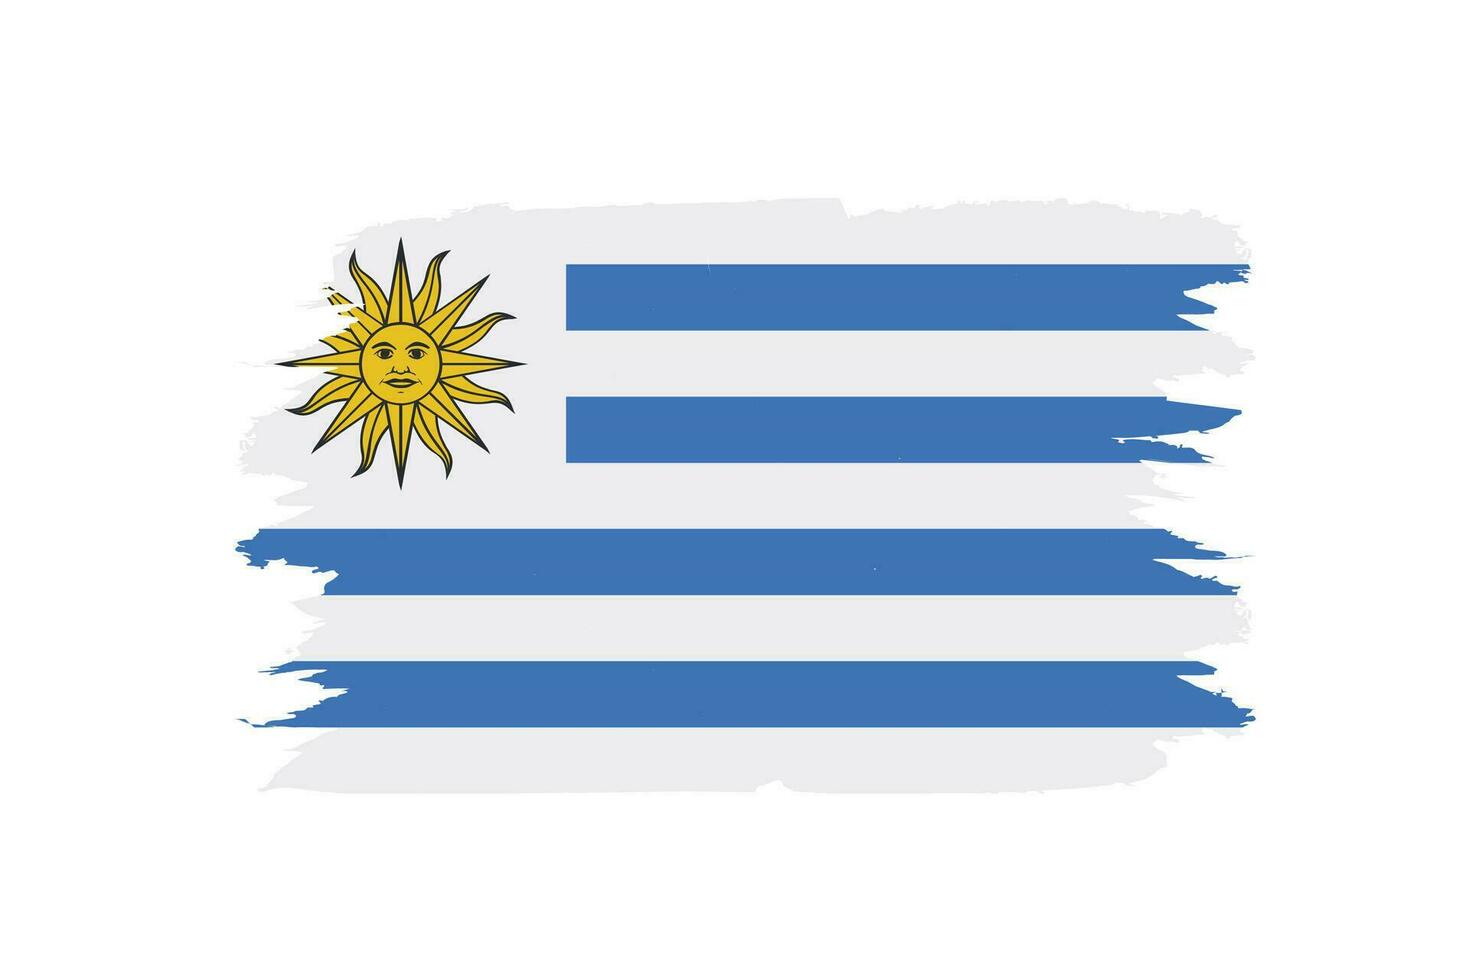 The flag of the Republic of Uruguay as a vector illustration